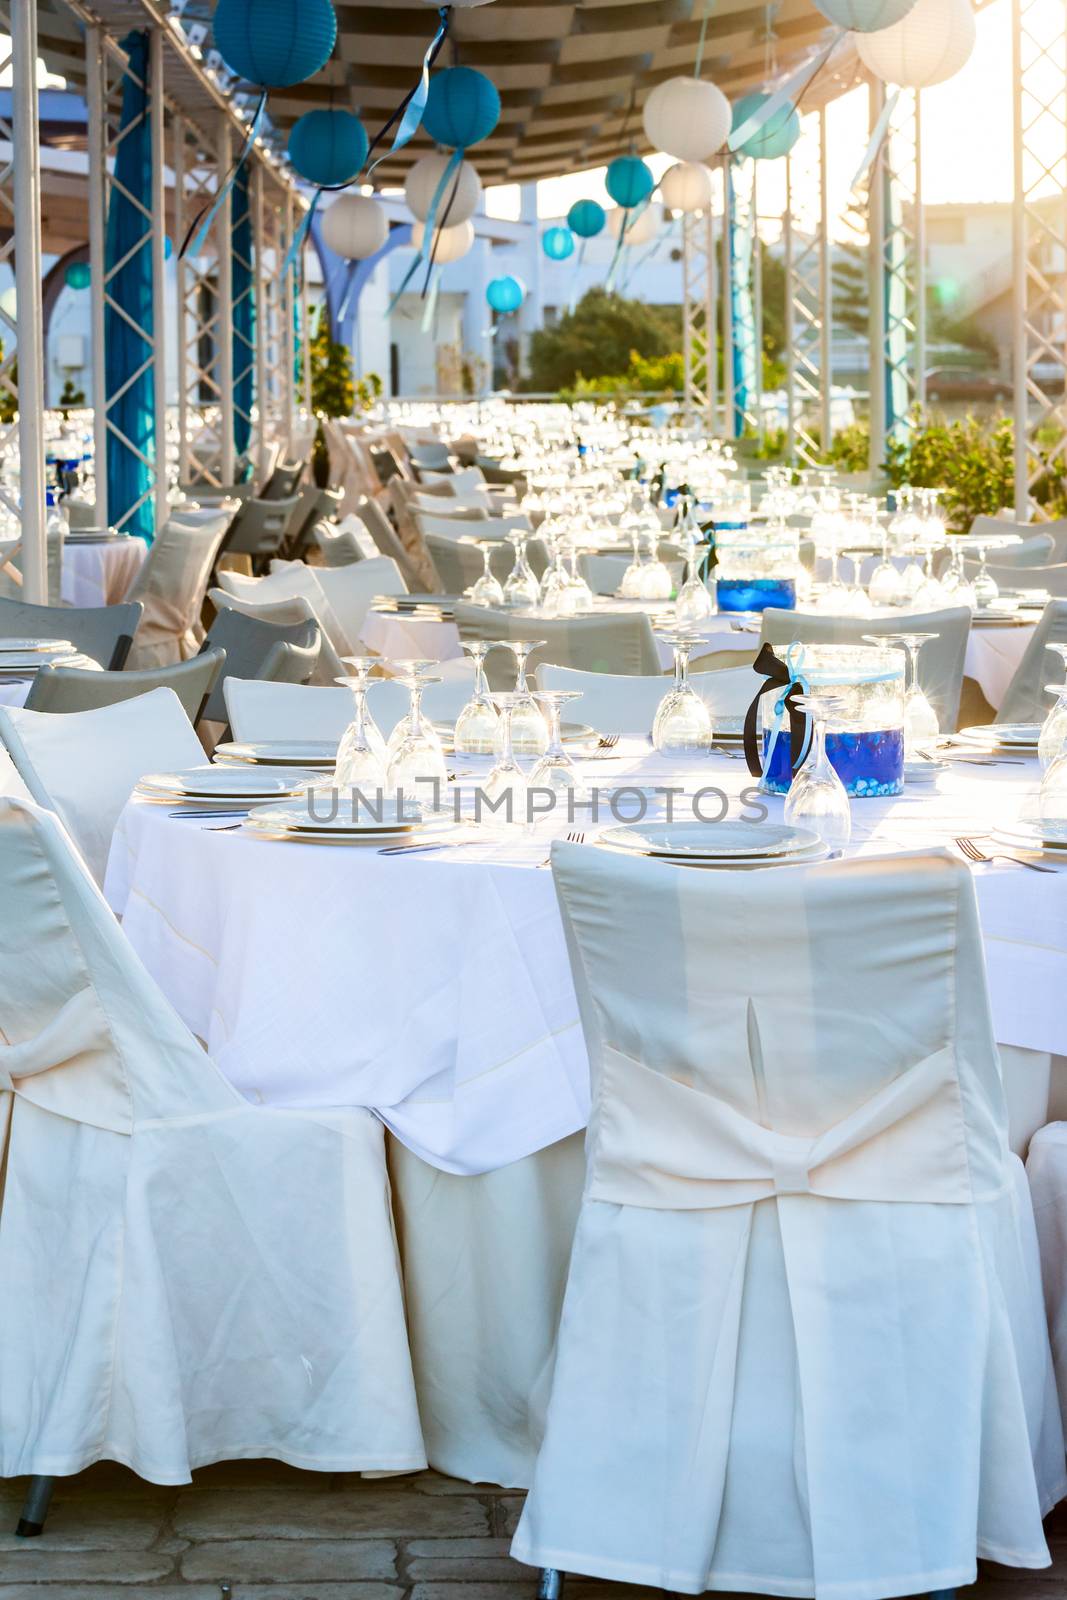 Table setting for an event party at outdoor cafe